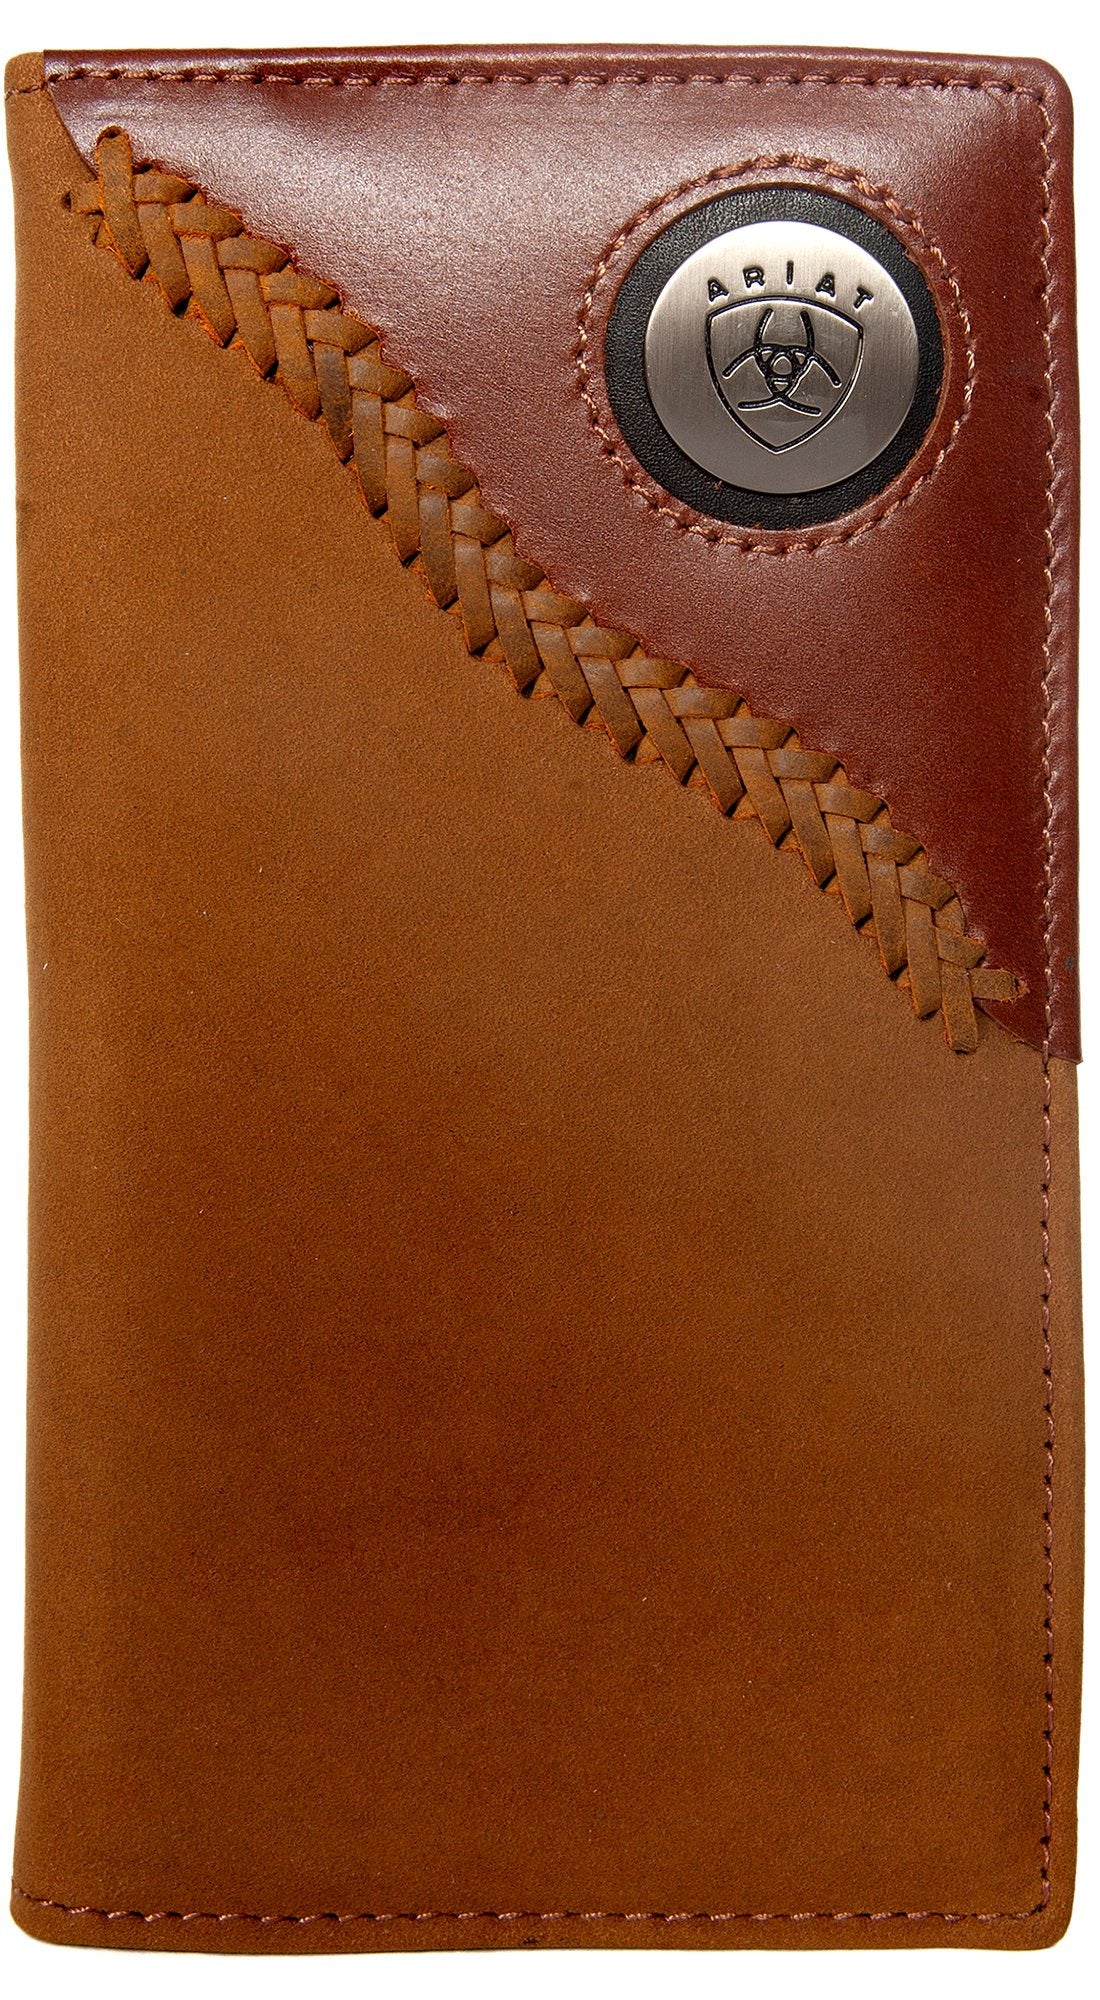 Ariat Rodeo Wallet - WLT1113A (6931986022477)